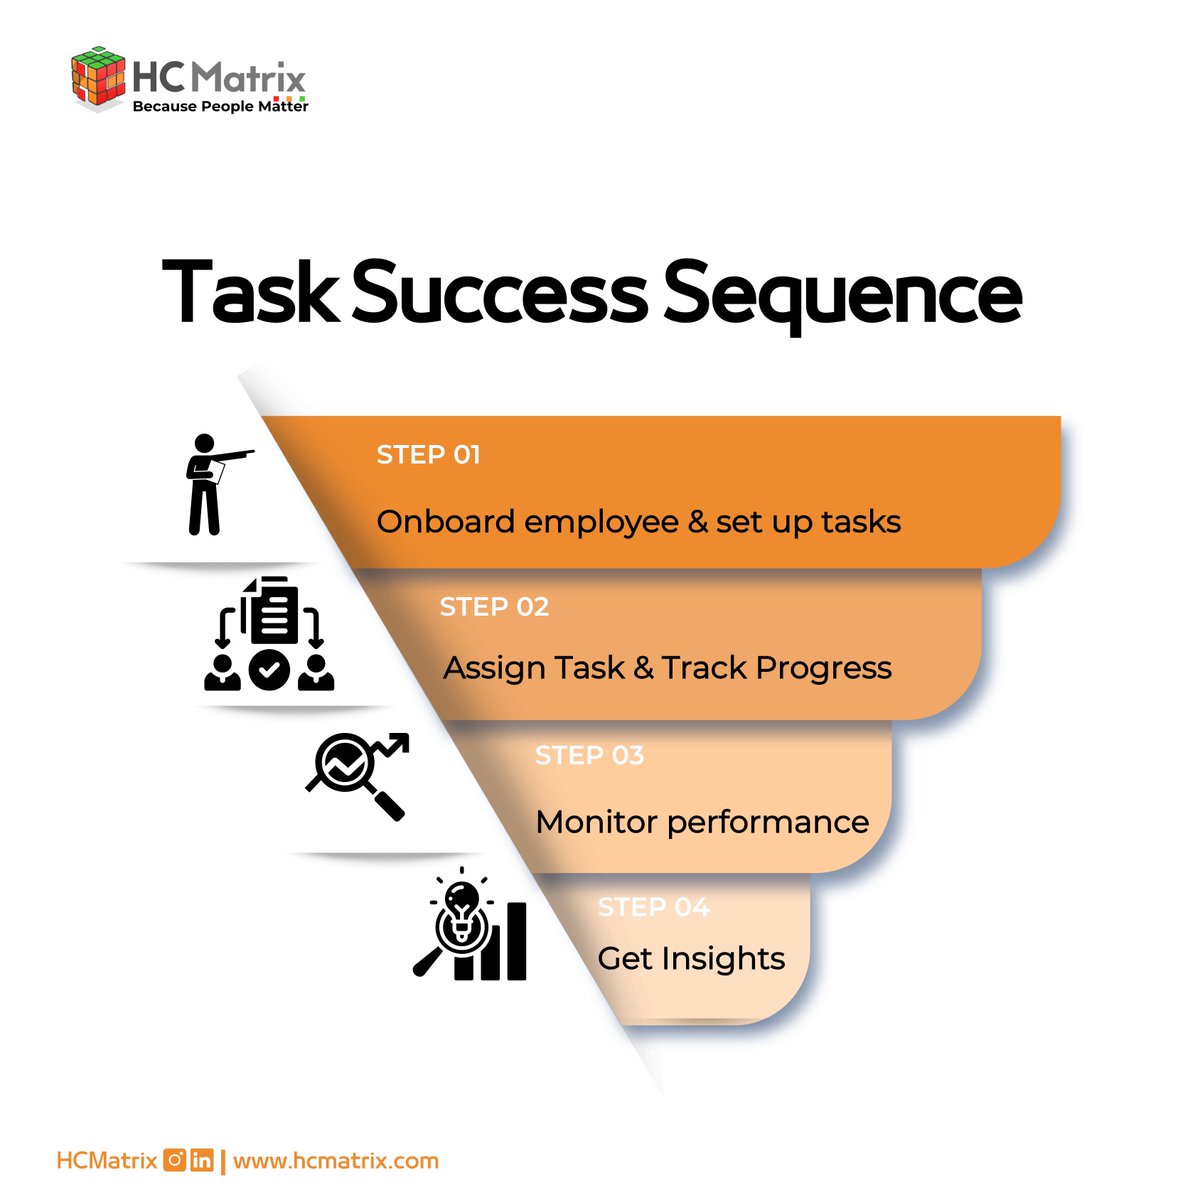 Would you like to have the ability to manage your employee task better? then you need HCMatrix.

Task Success Sequence is a proven framework that guides tasks from start to finish, ensuring successful completion. 

Click the link in our bio to get started.

#taskmaster